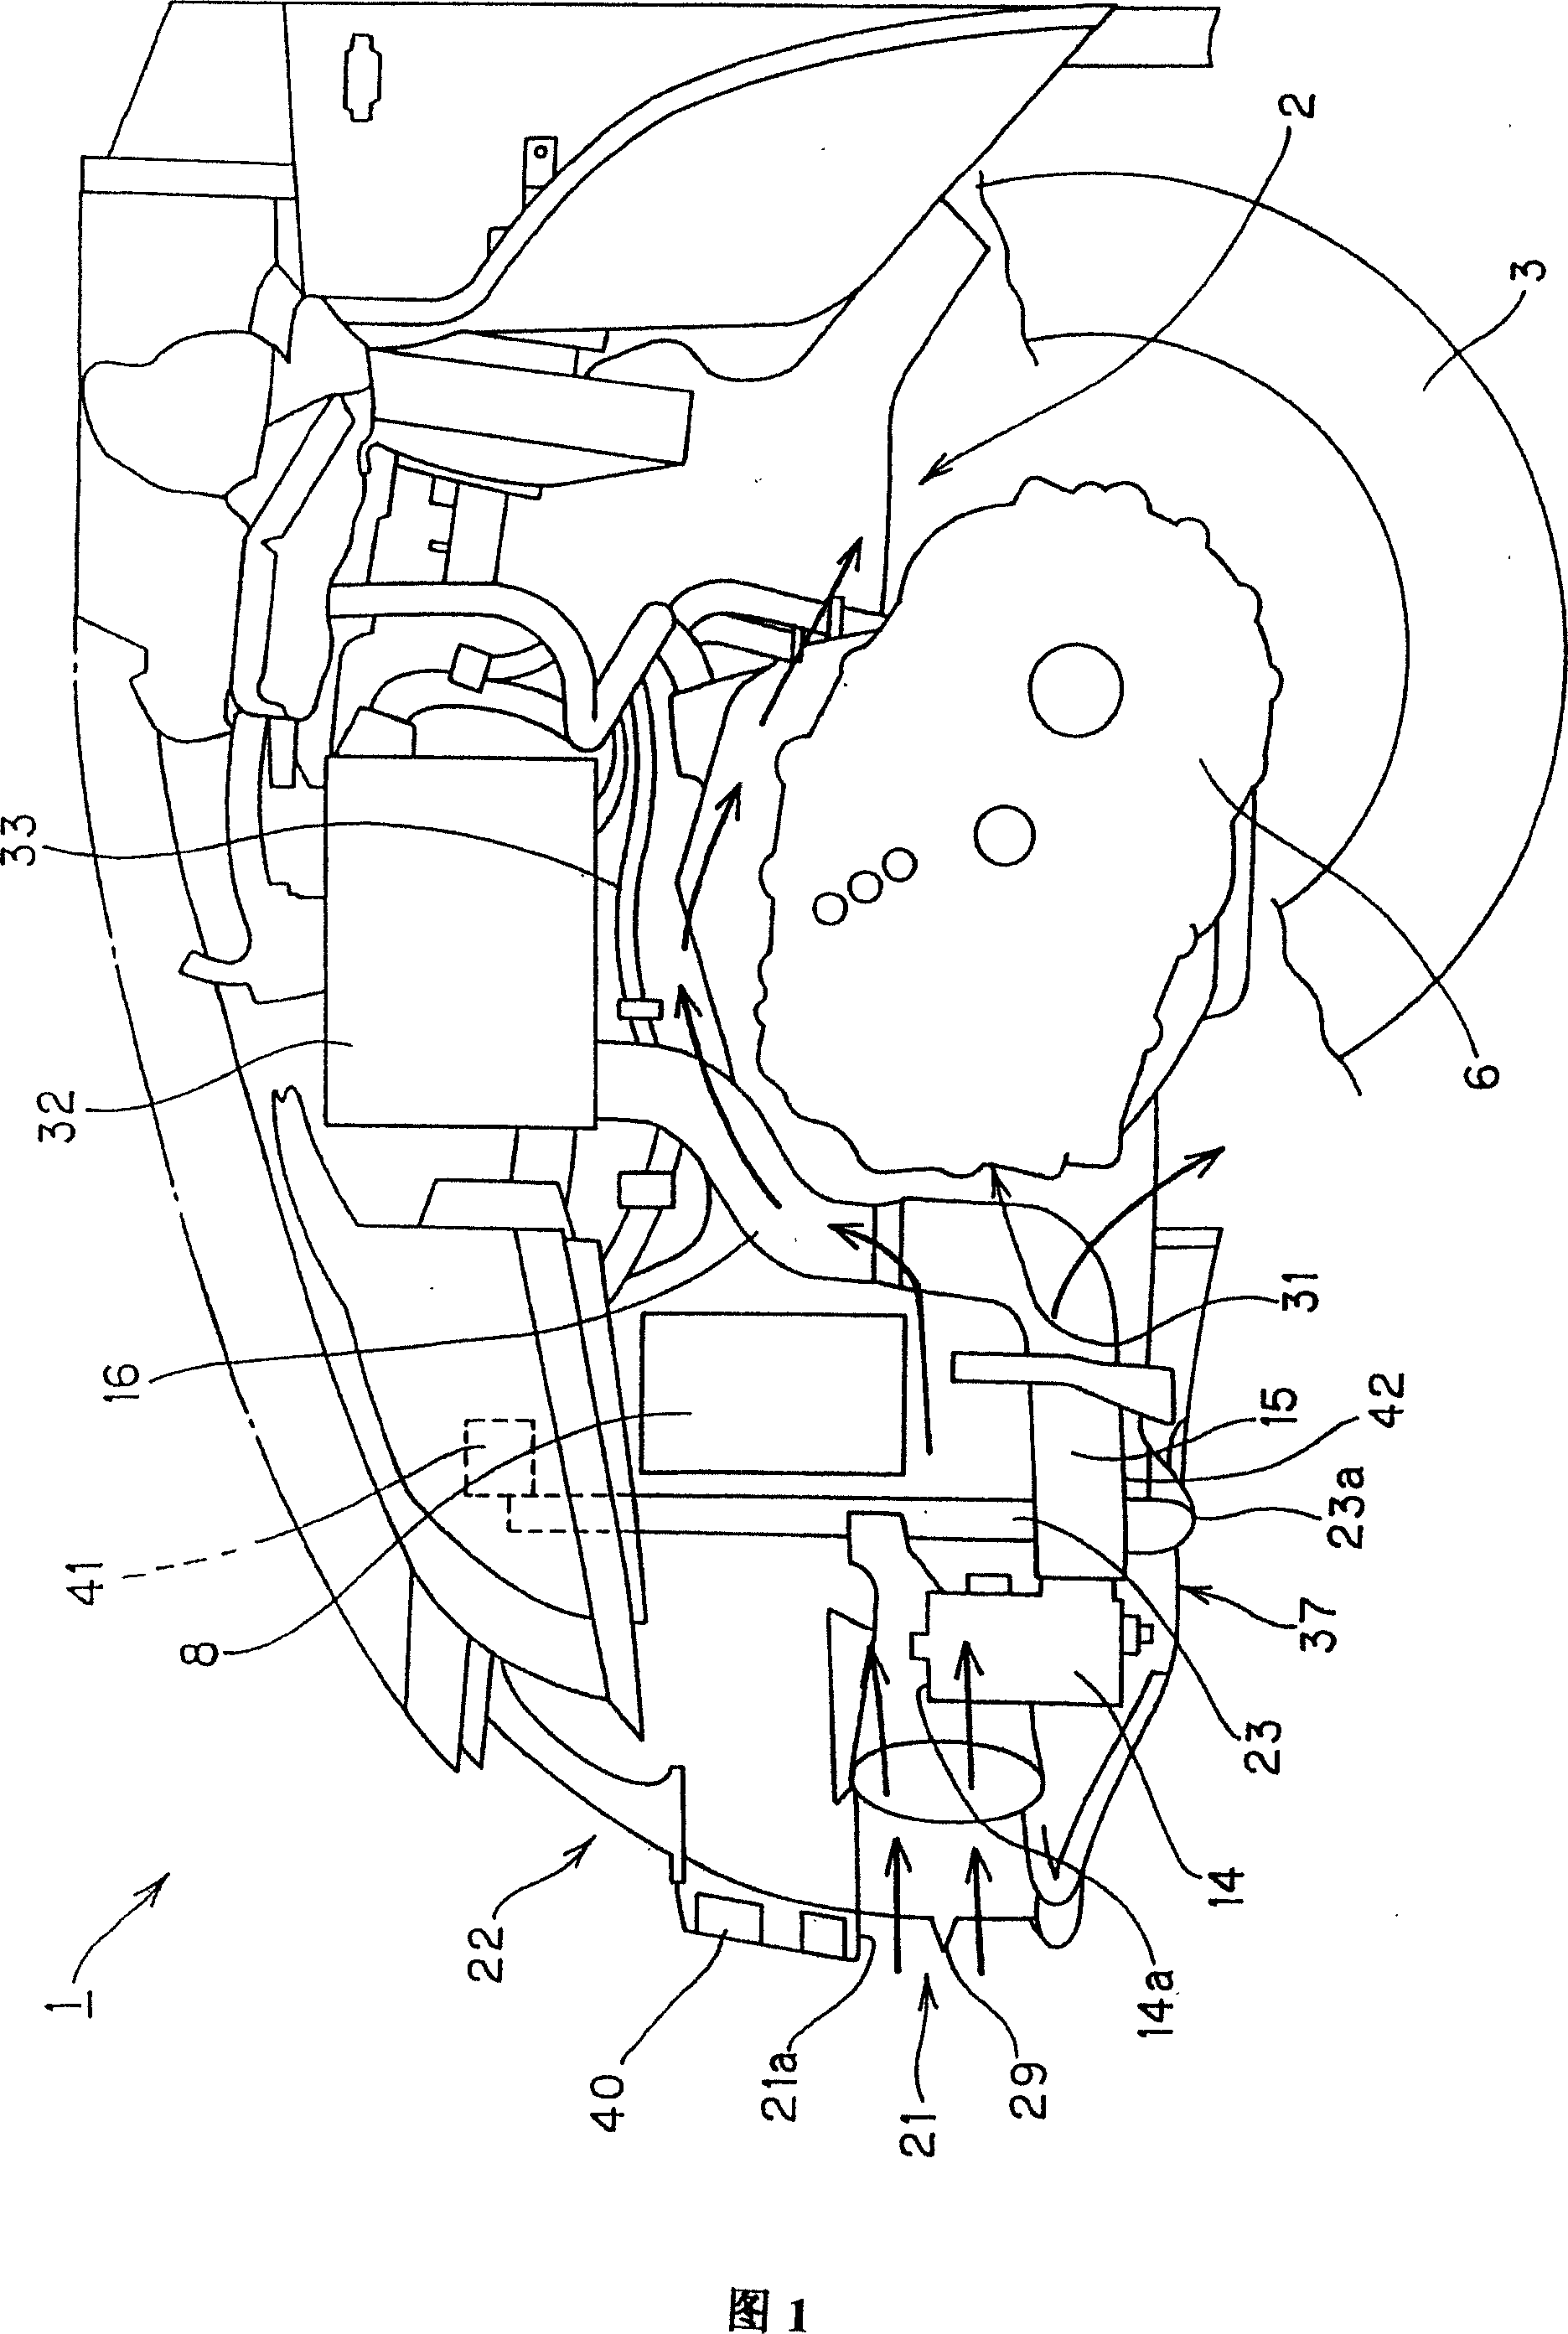 Intermediate cooler setting structure with supercharge equipment engine